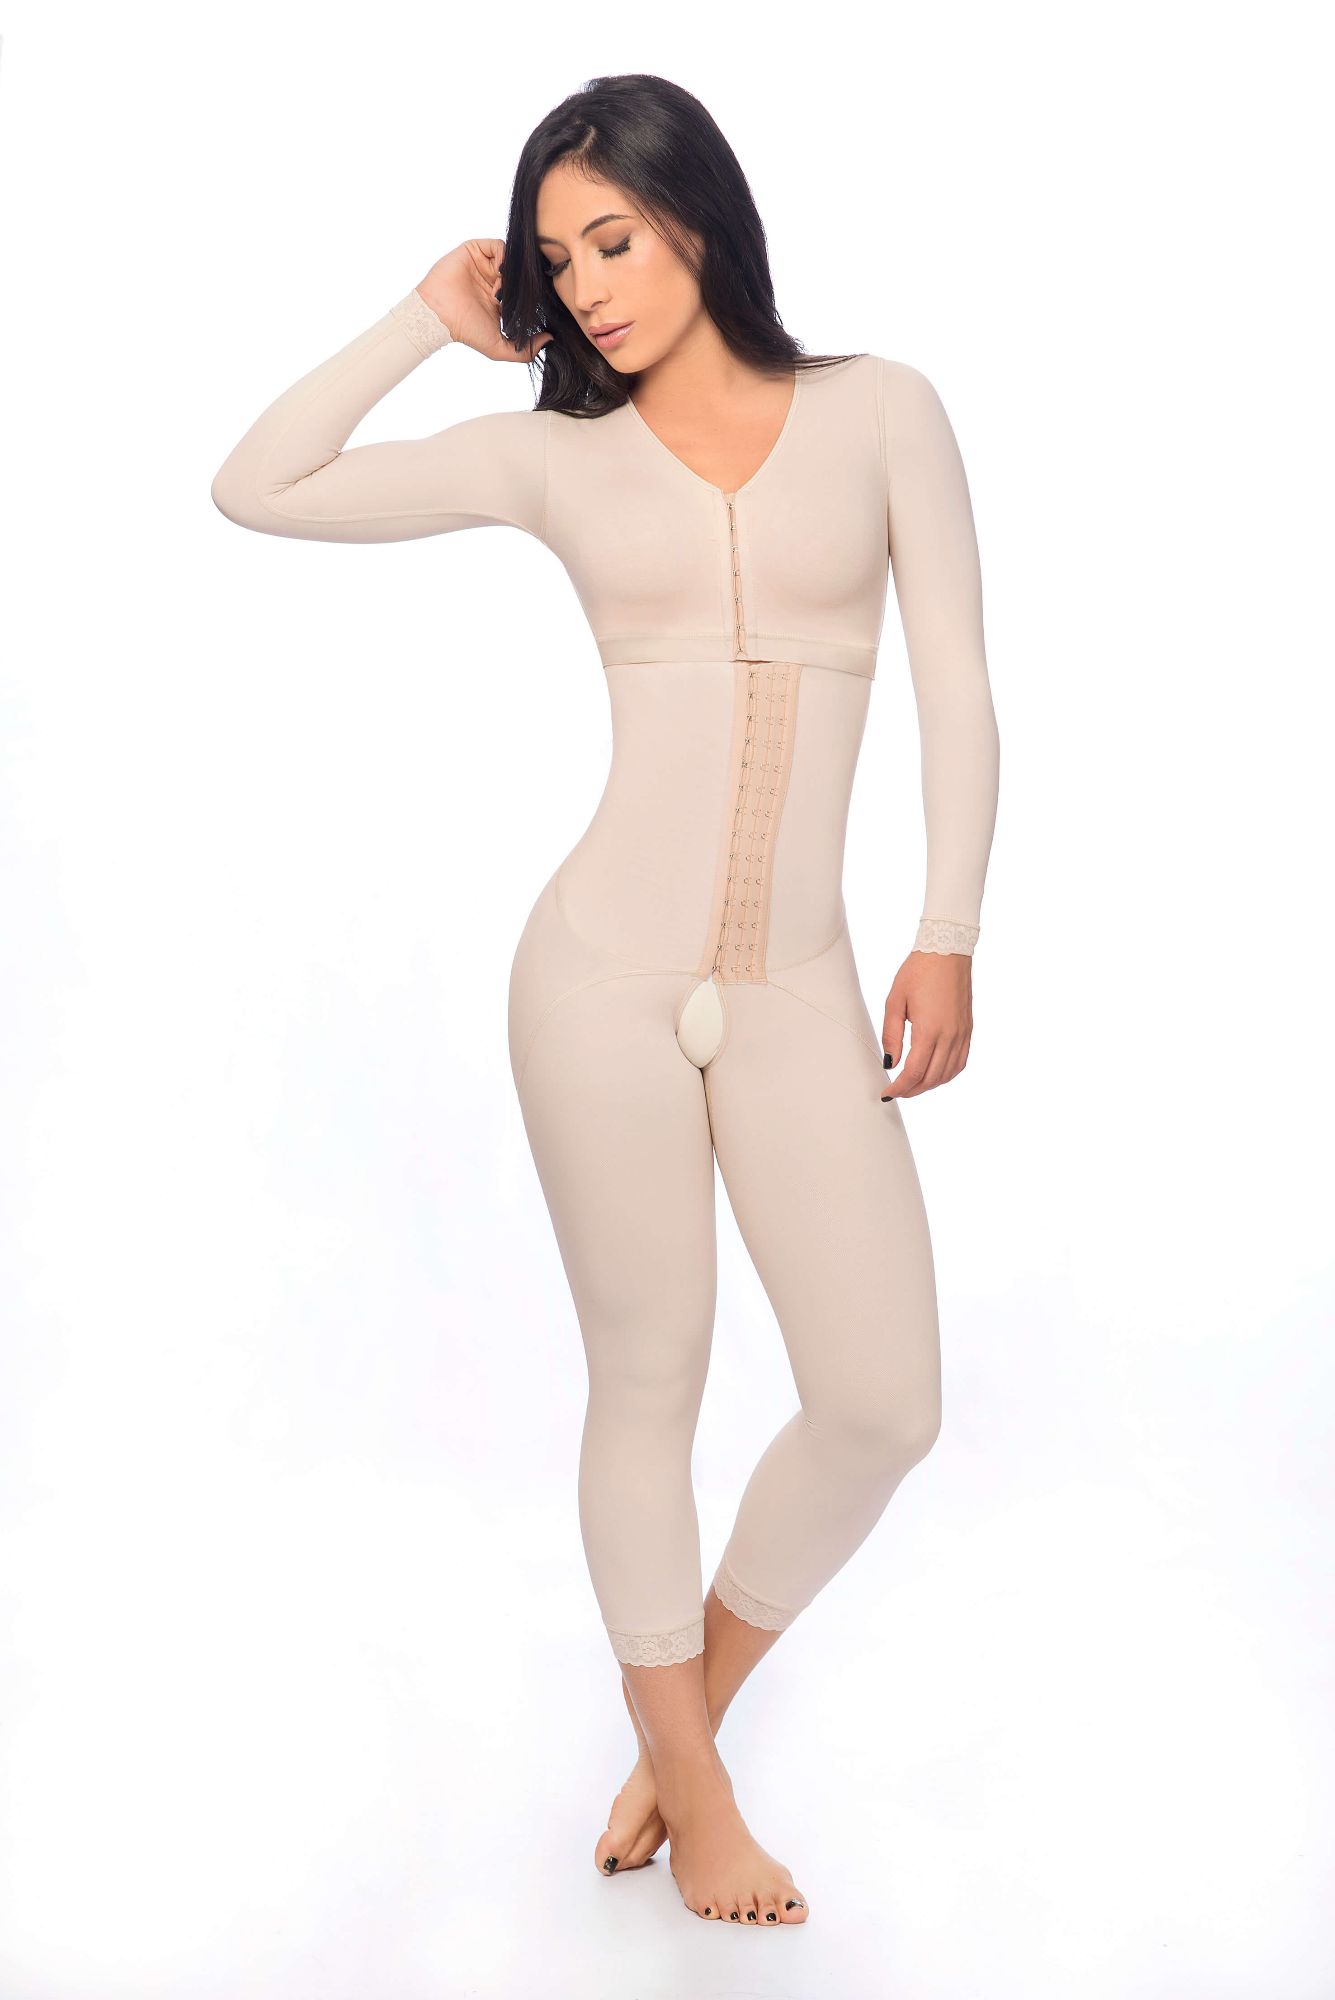 Full body under knee faja with sleeves and hook closure - Contour Fajas